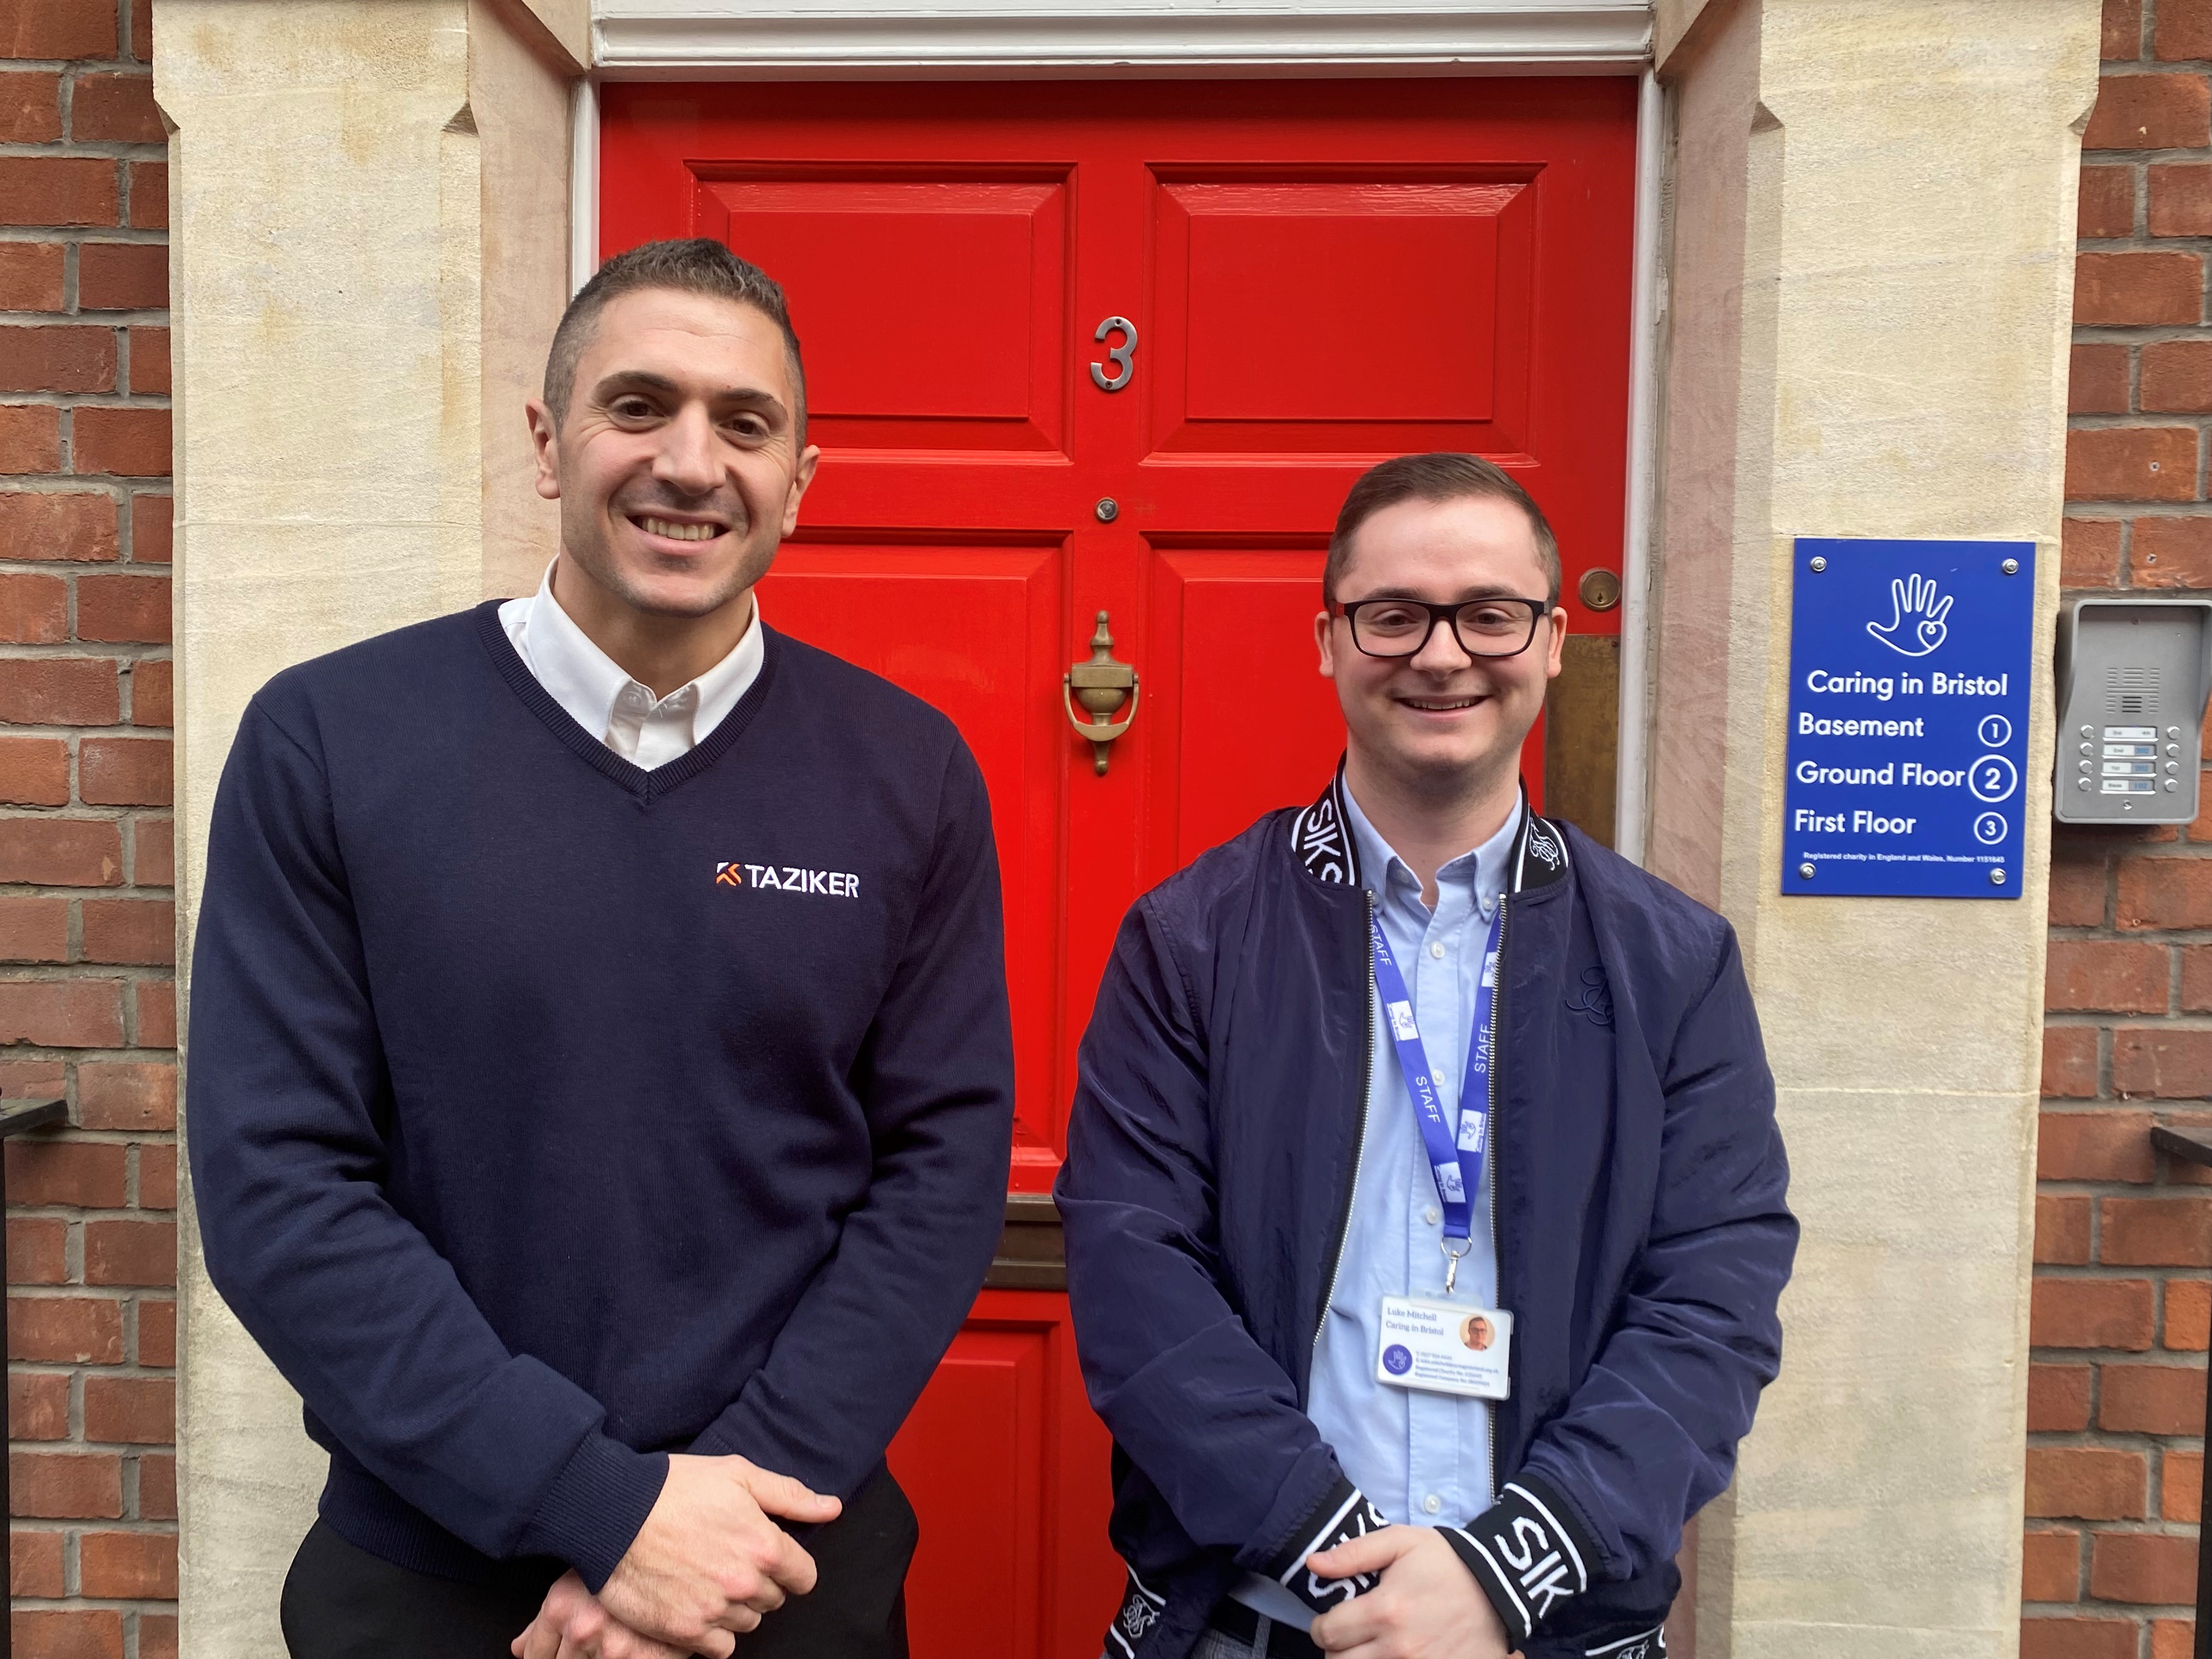 Taziker's Business Development Director, Tom Nicotra, and Caring in Bristol's Corporate and Community Partnerships Coordinator, Luke Mitchell, smiling outside Caring in Bristol's office.